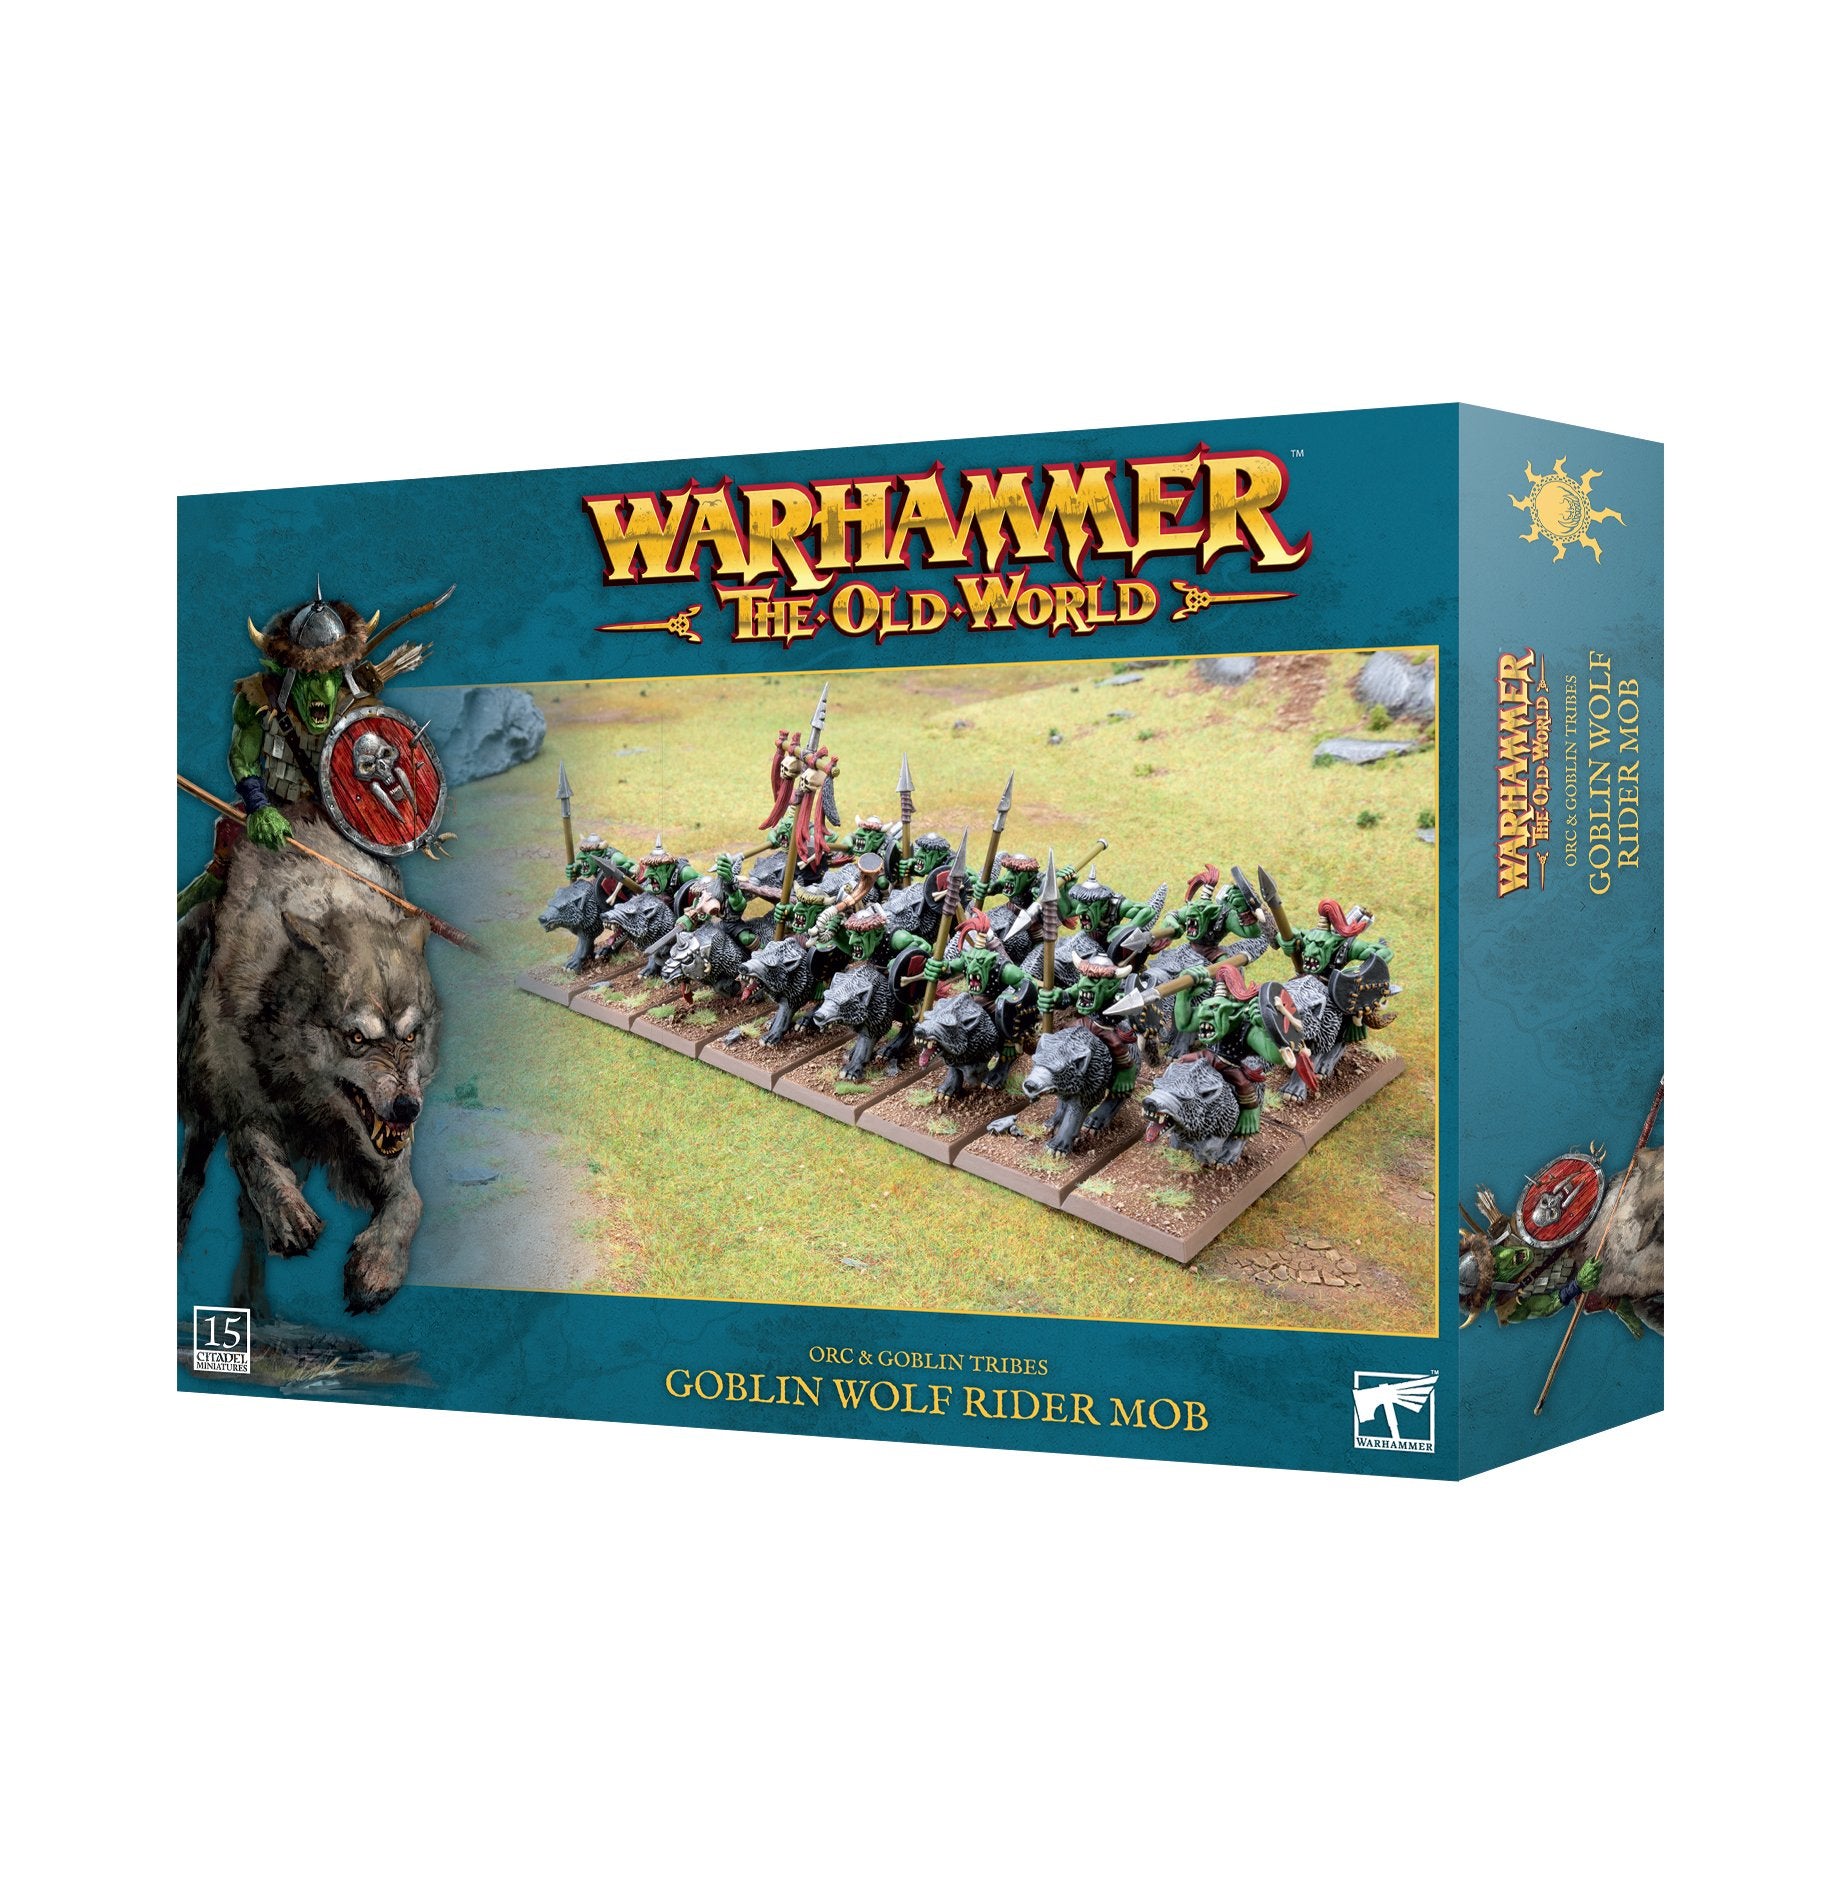 Orc & Goblin Tribes: Goblin Wolf Rider Mob - Warhammer The Old World